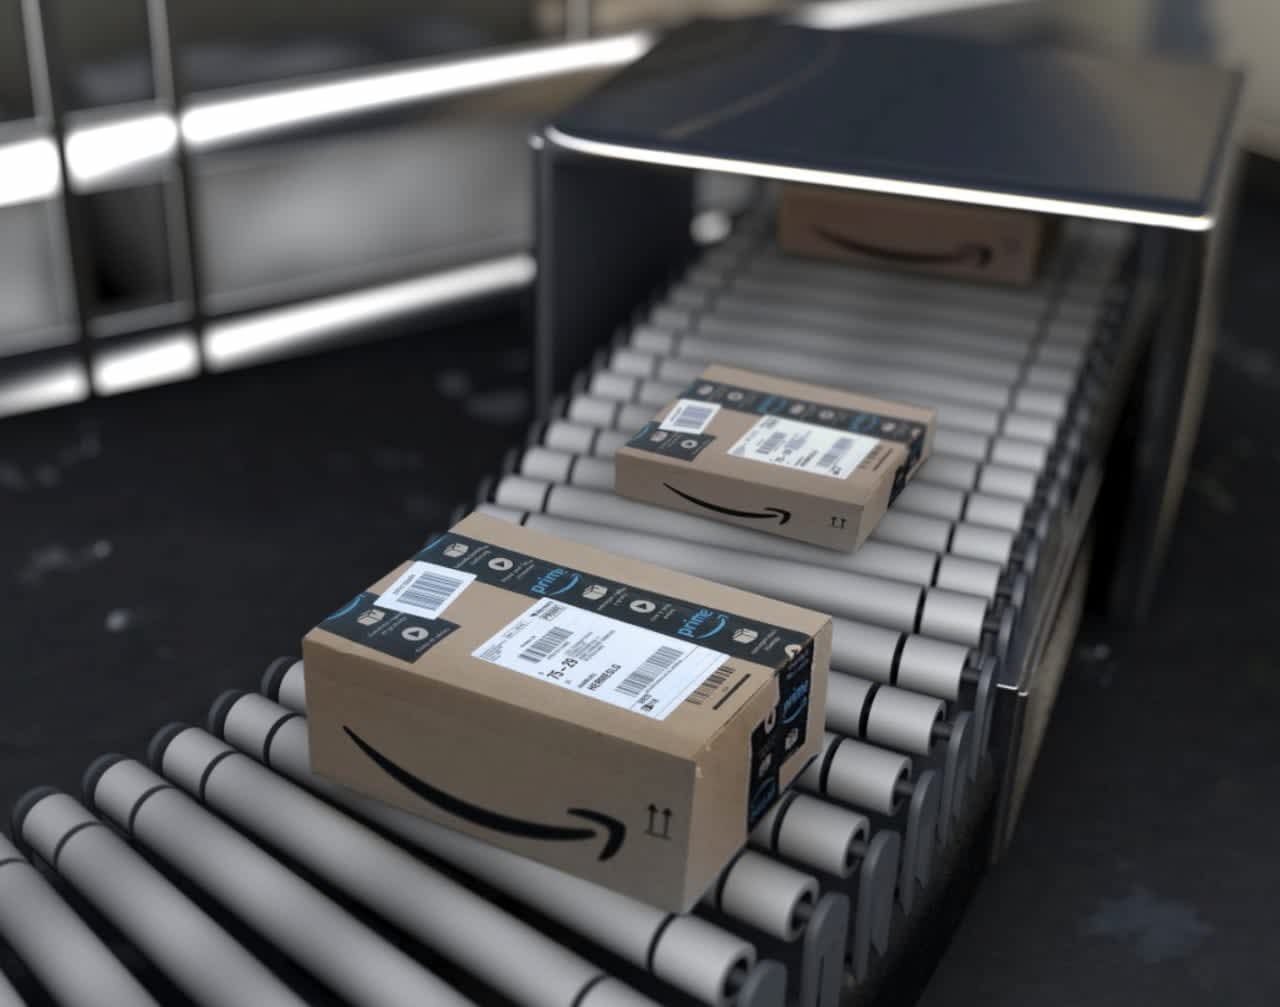 Amazon is opening a new delivery station on Long Island.